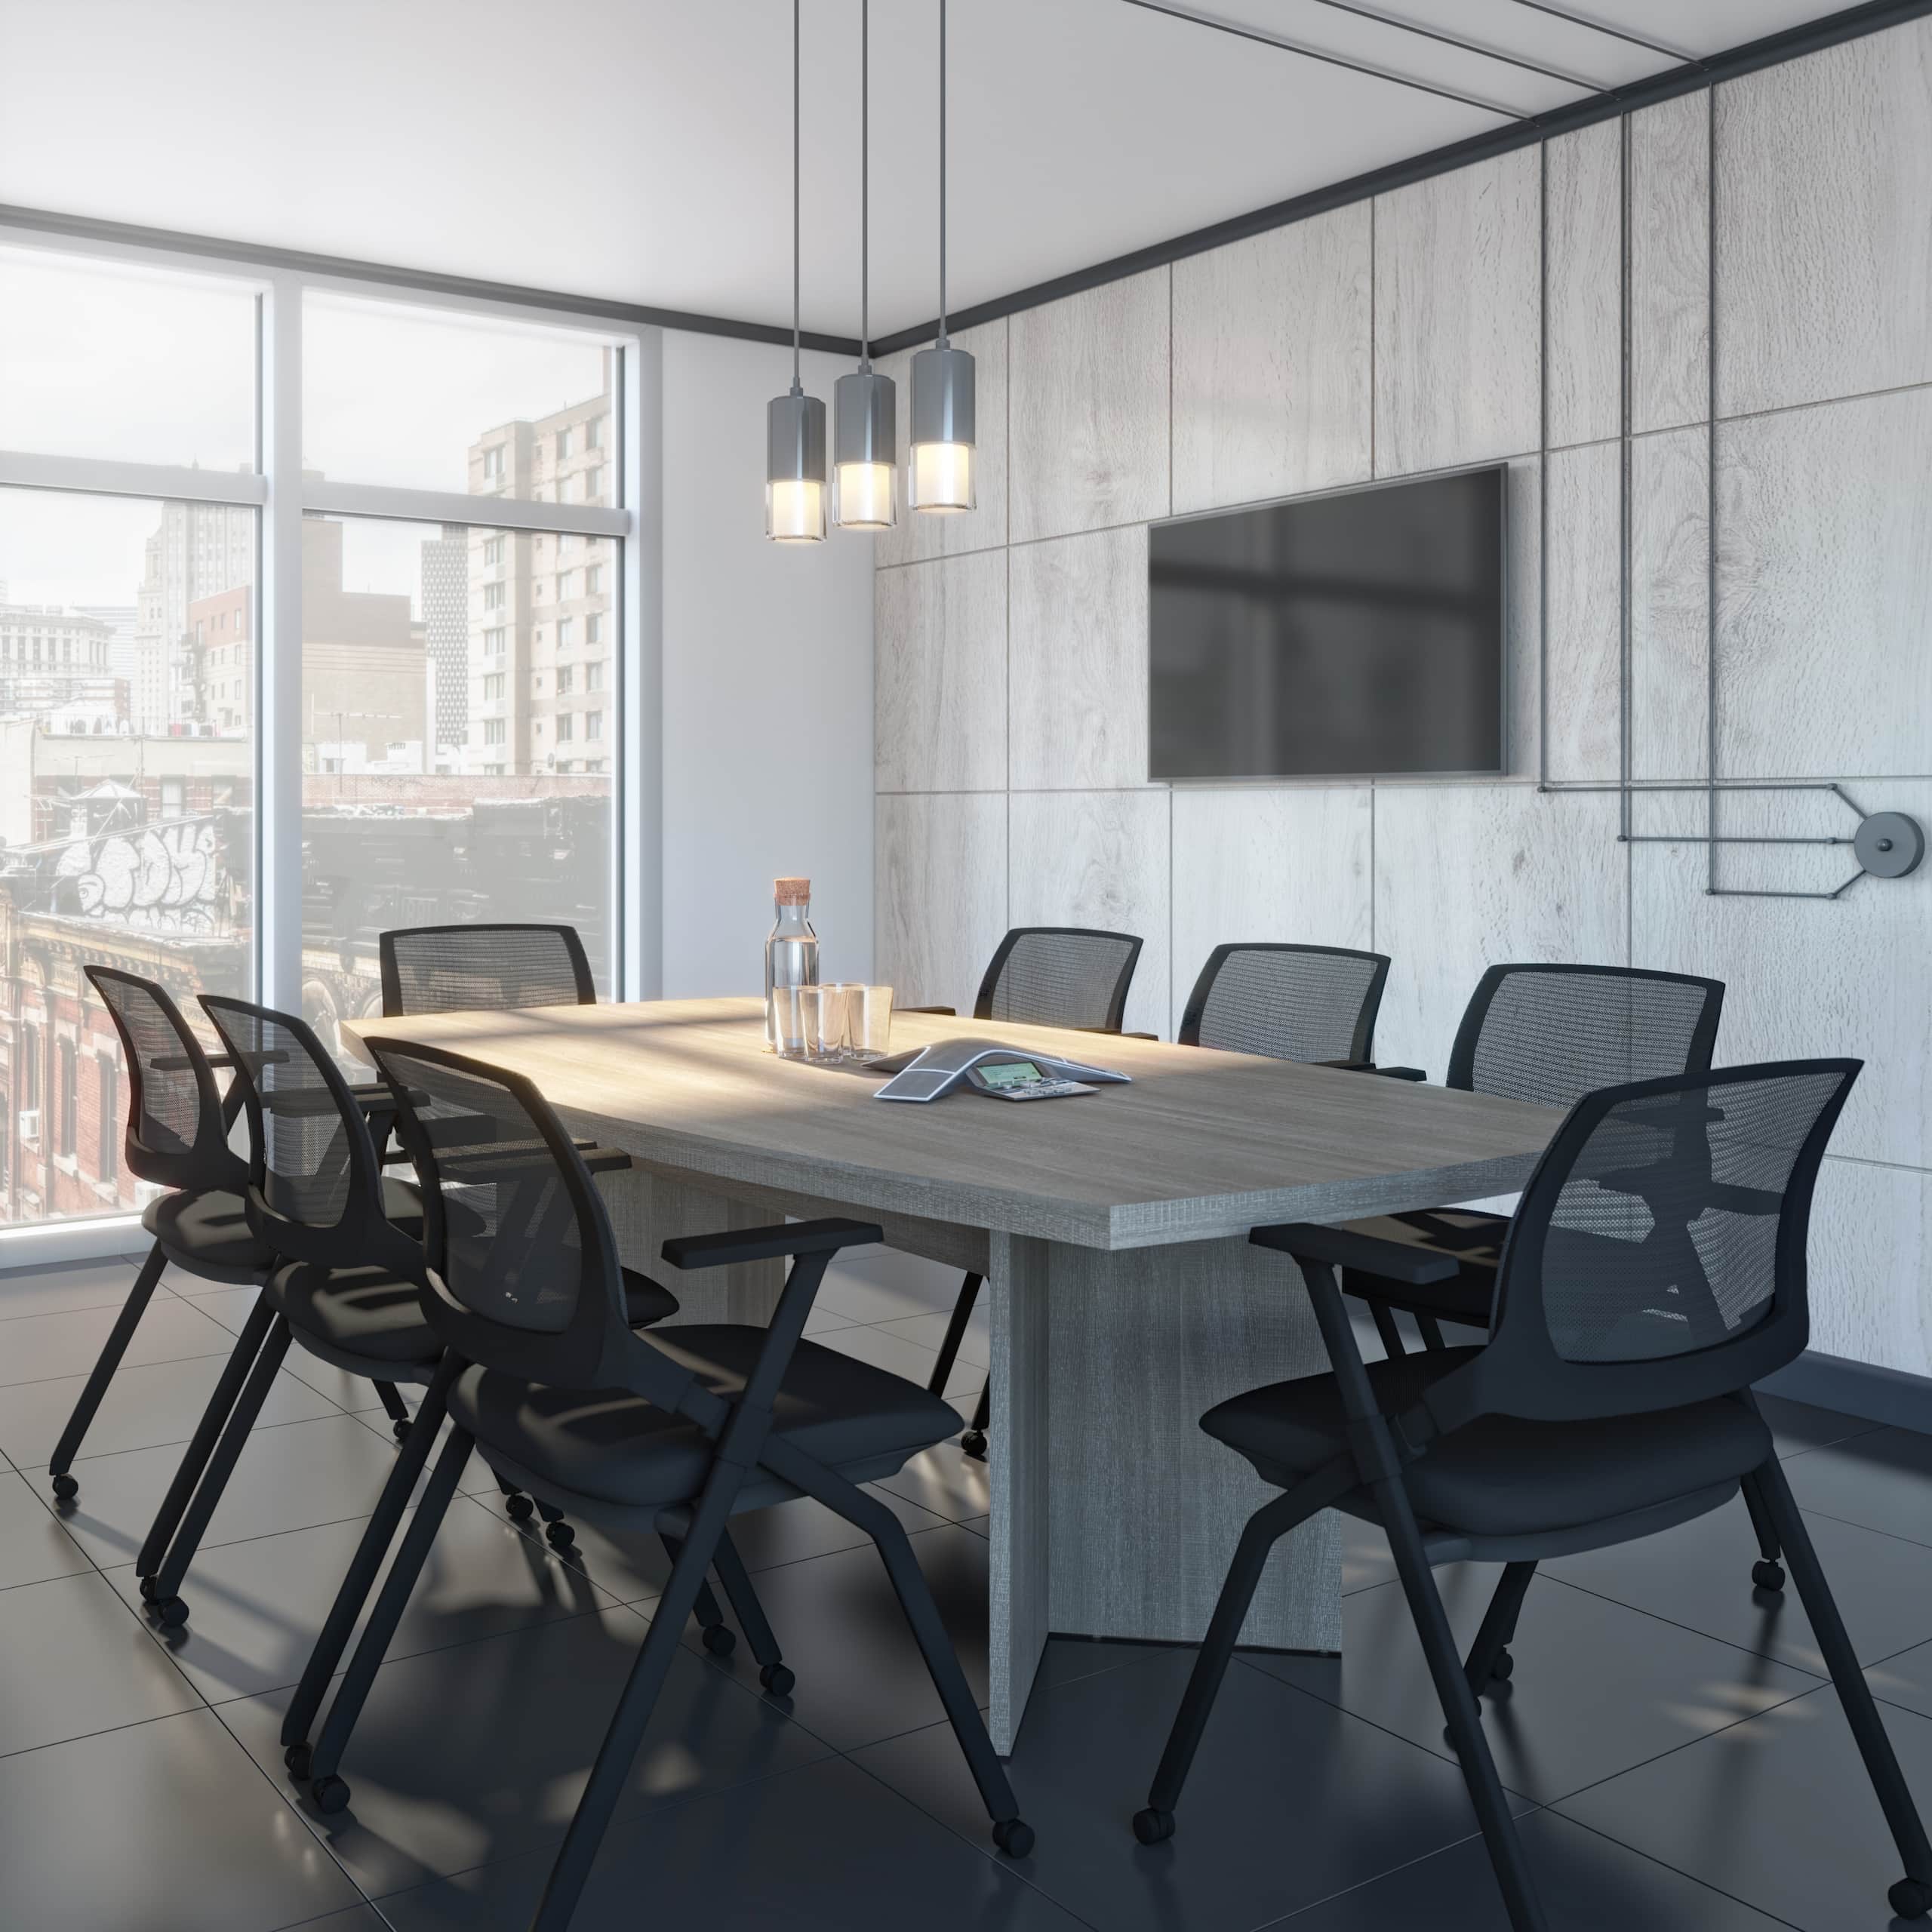 Give Your Business a Boost with the Right Commercial Office Furniture